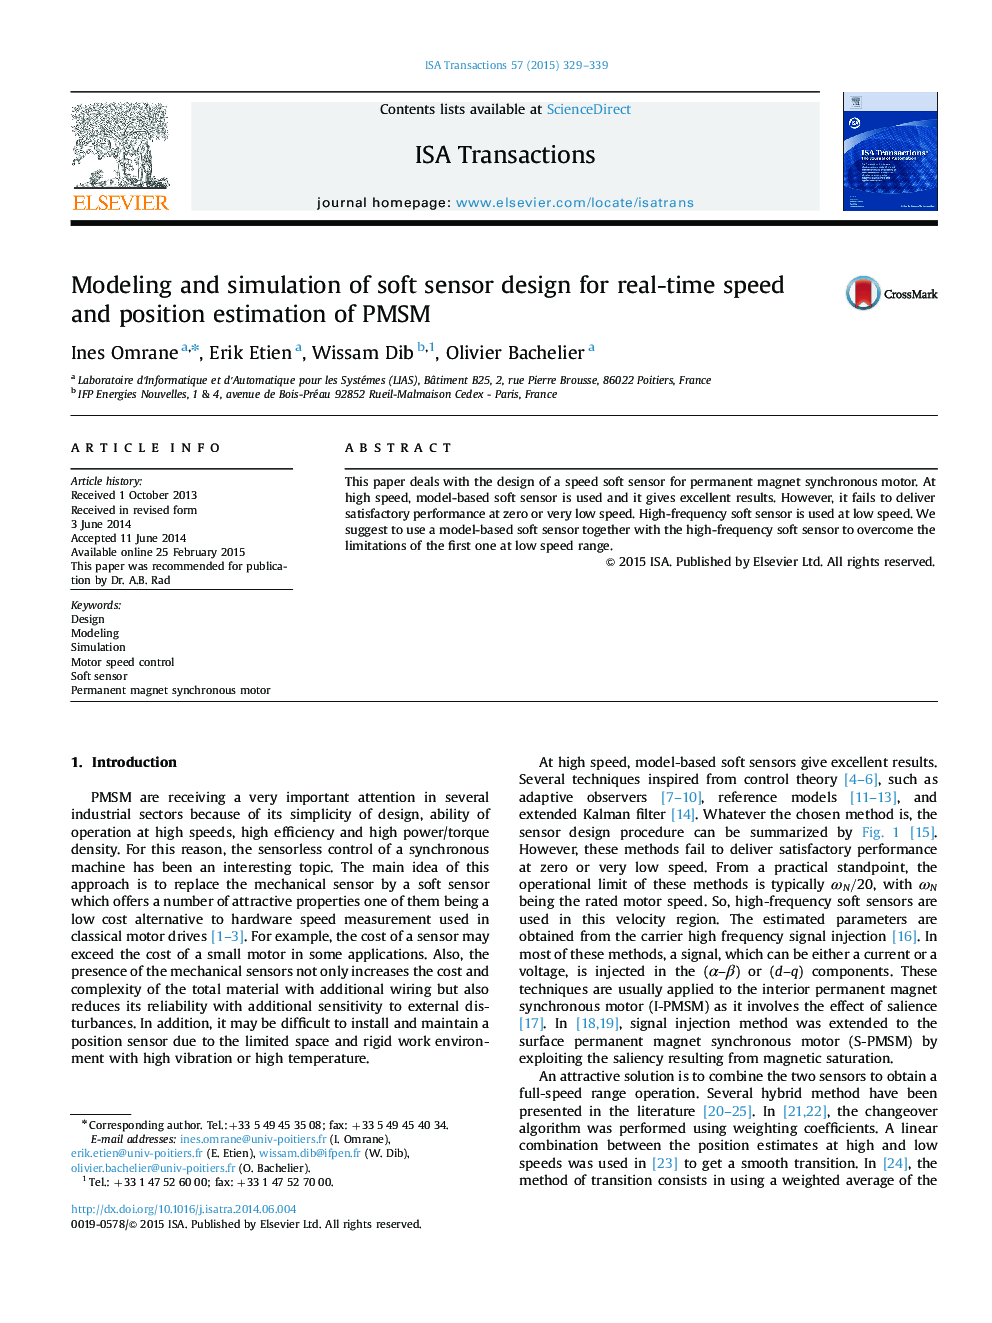 Research ArticleModeling and simulation of soft sensor design for real-time speed and position estimation of PMSM